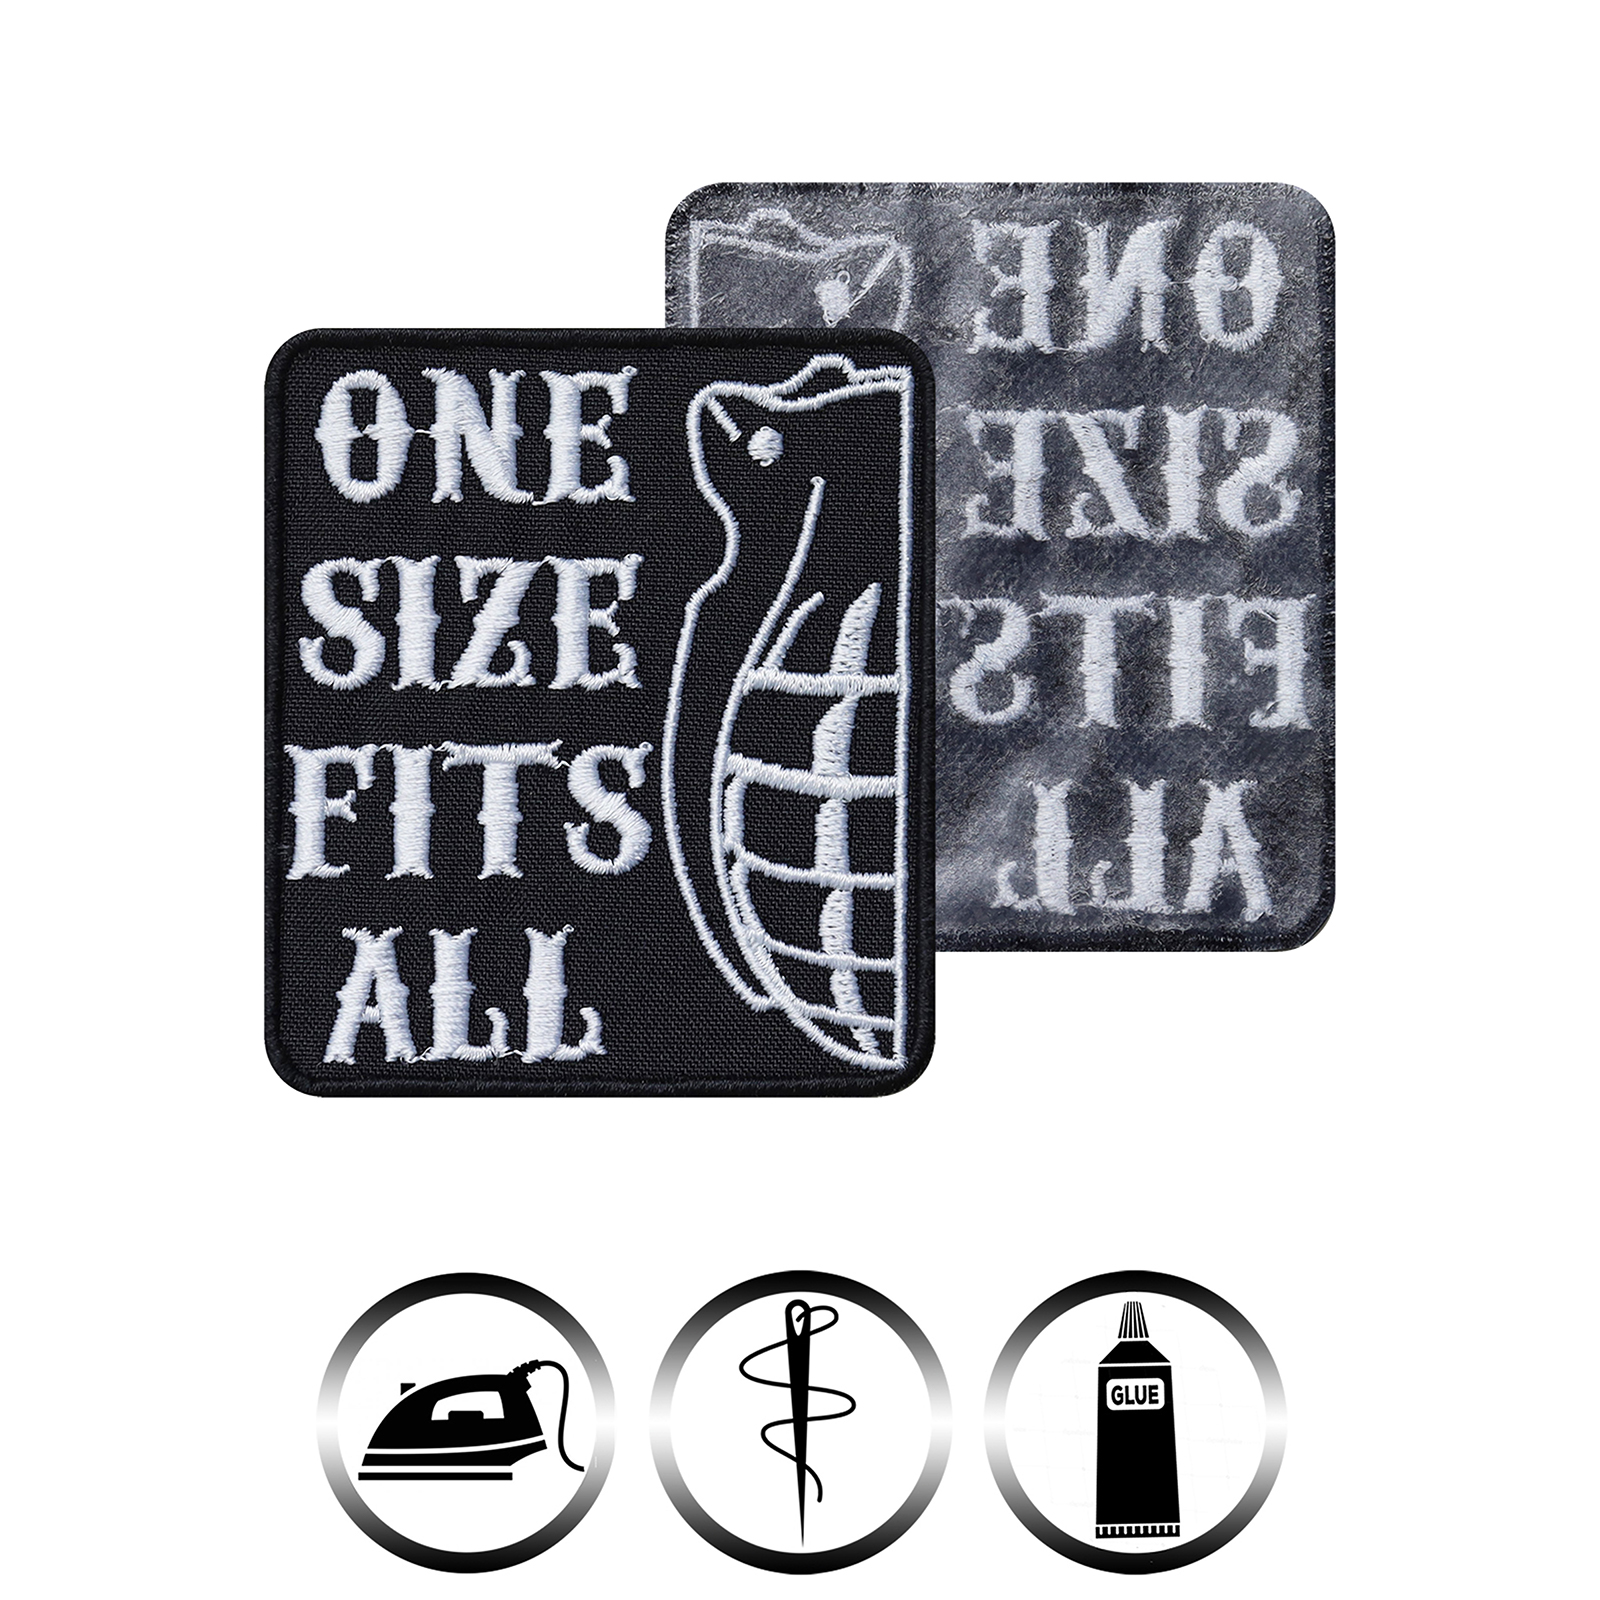 One size fits all - Patch